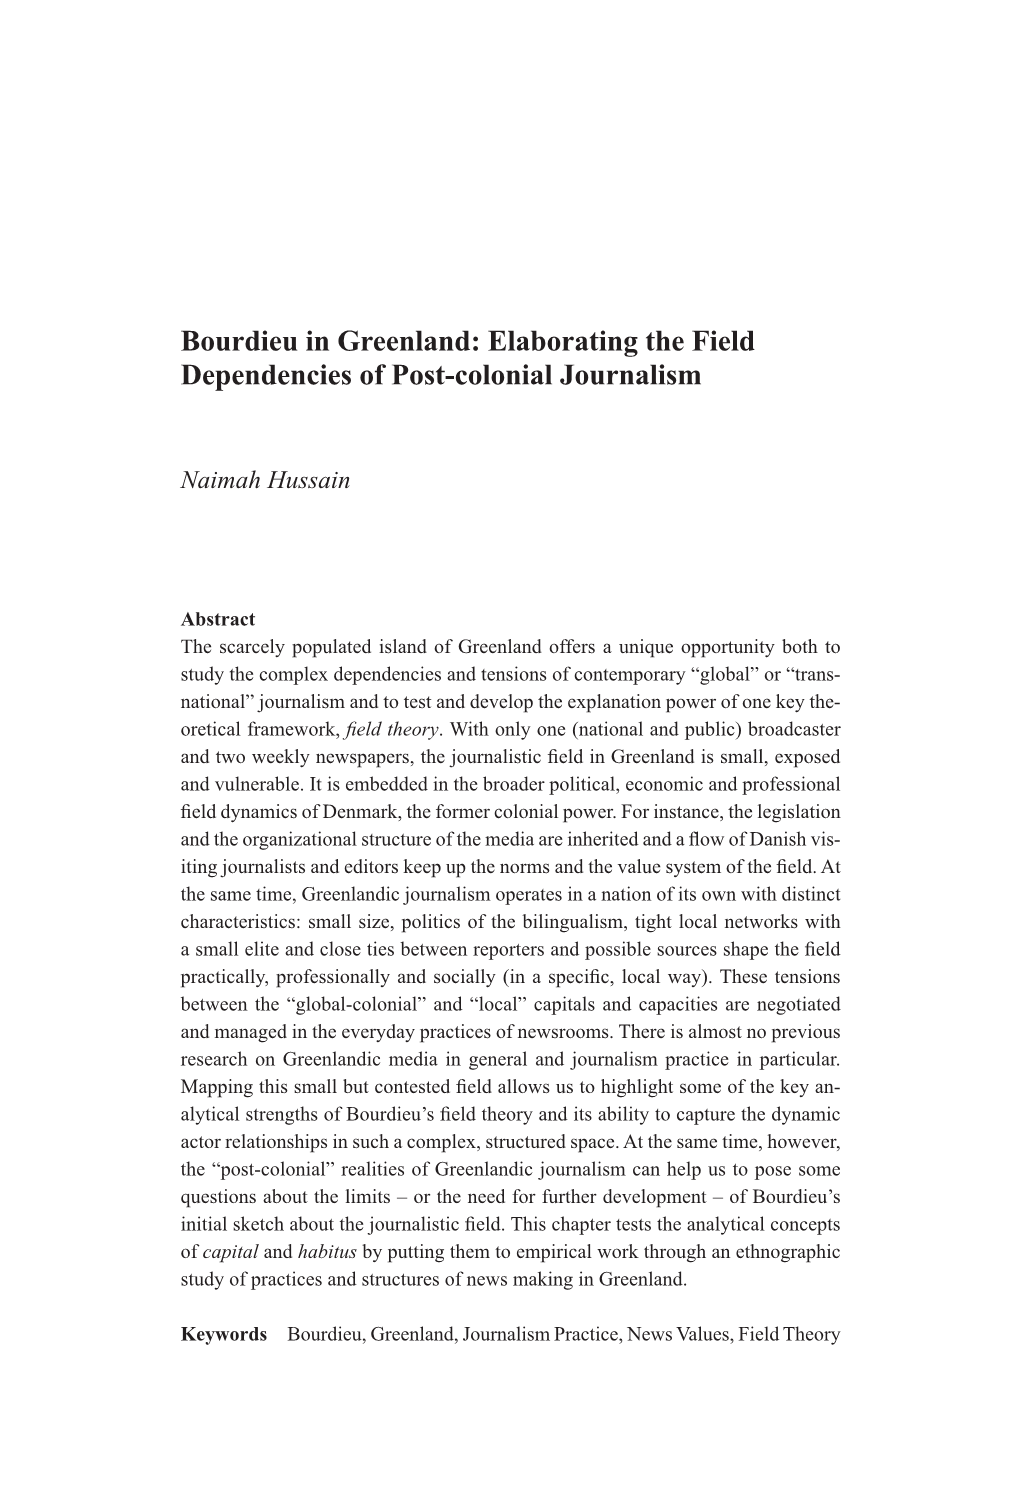 Bourdieu in Greenland: Elaborating the Field Dependencies of Post-Colonial Journalism